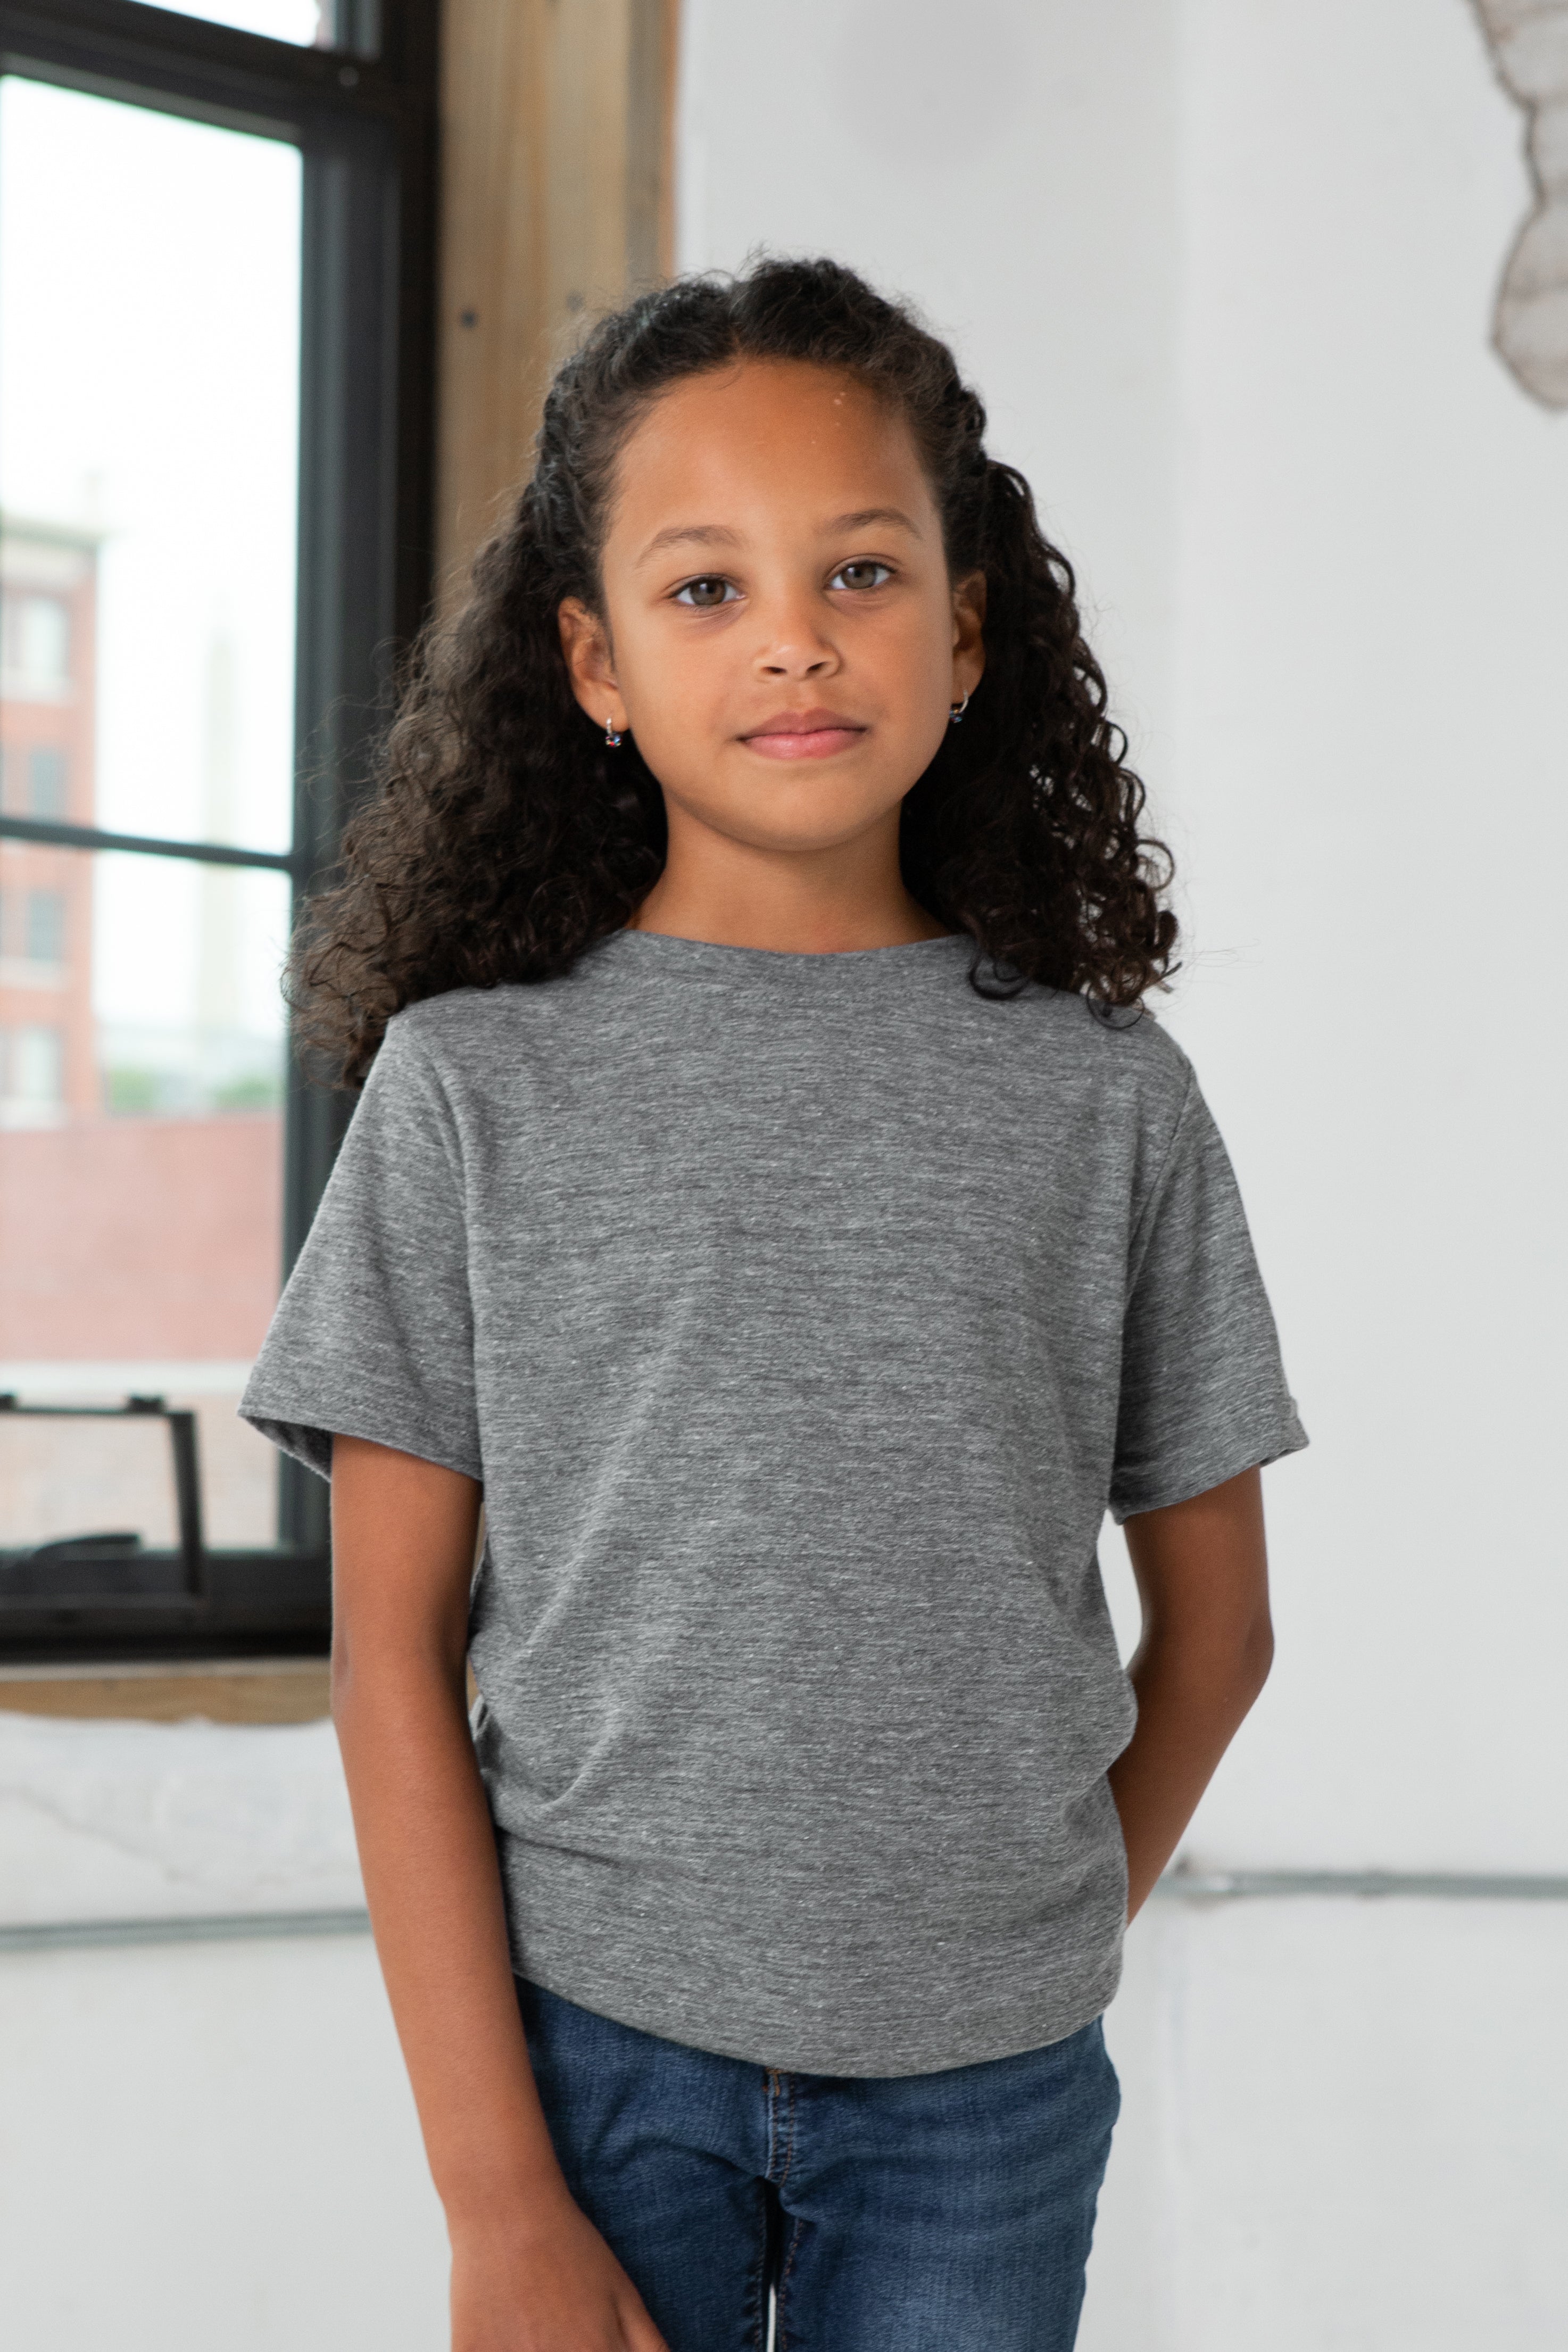 Girl Model wearing GOEX Youth Eco Triblend Tee in Heather Grey